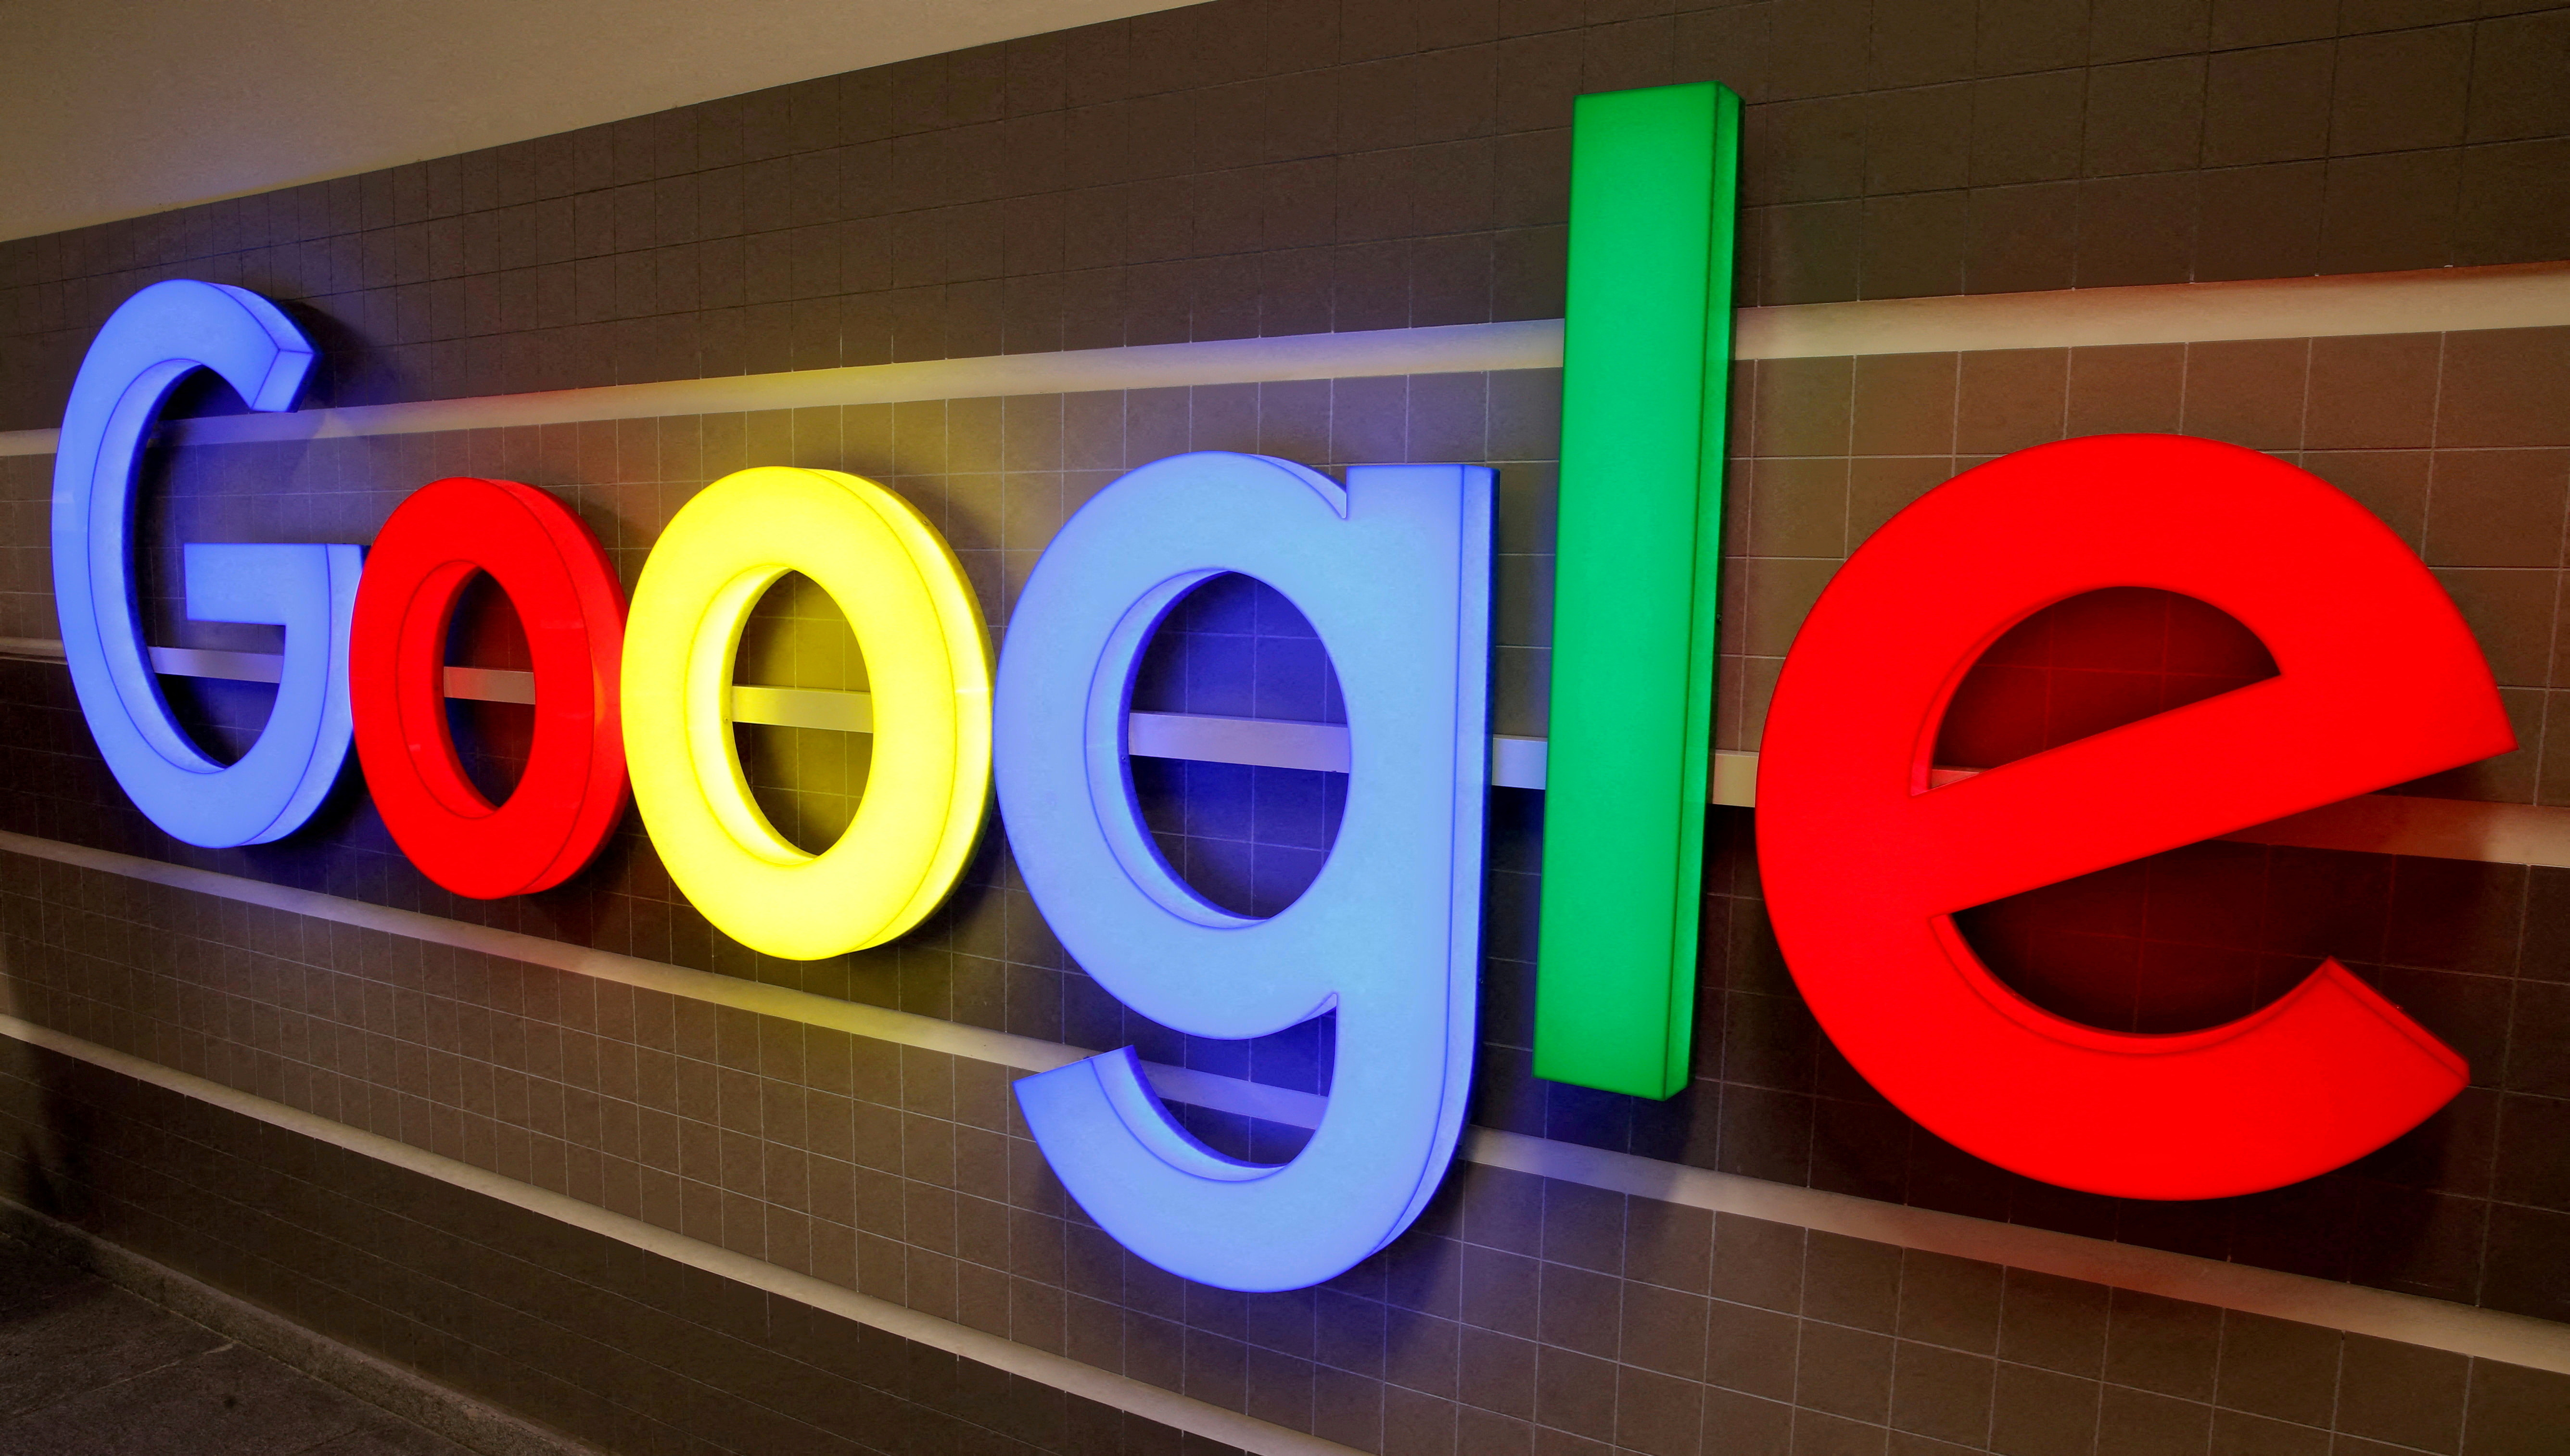 Google is in talks to invest hundreds of millions of dollars in startup Character.AI